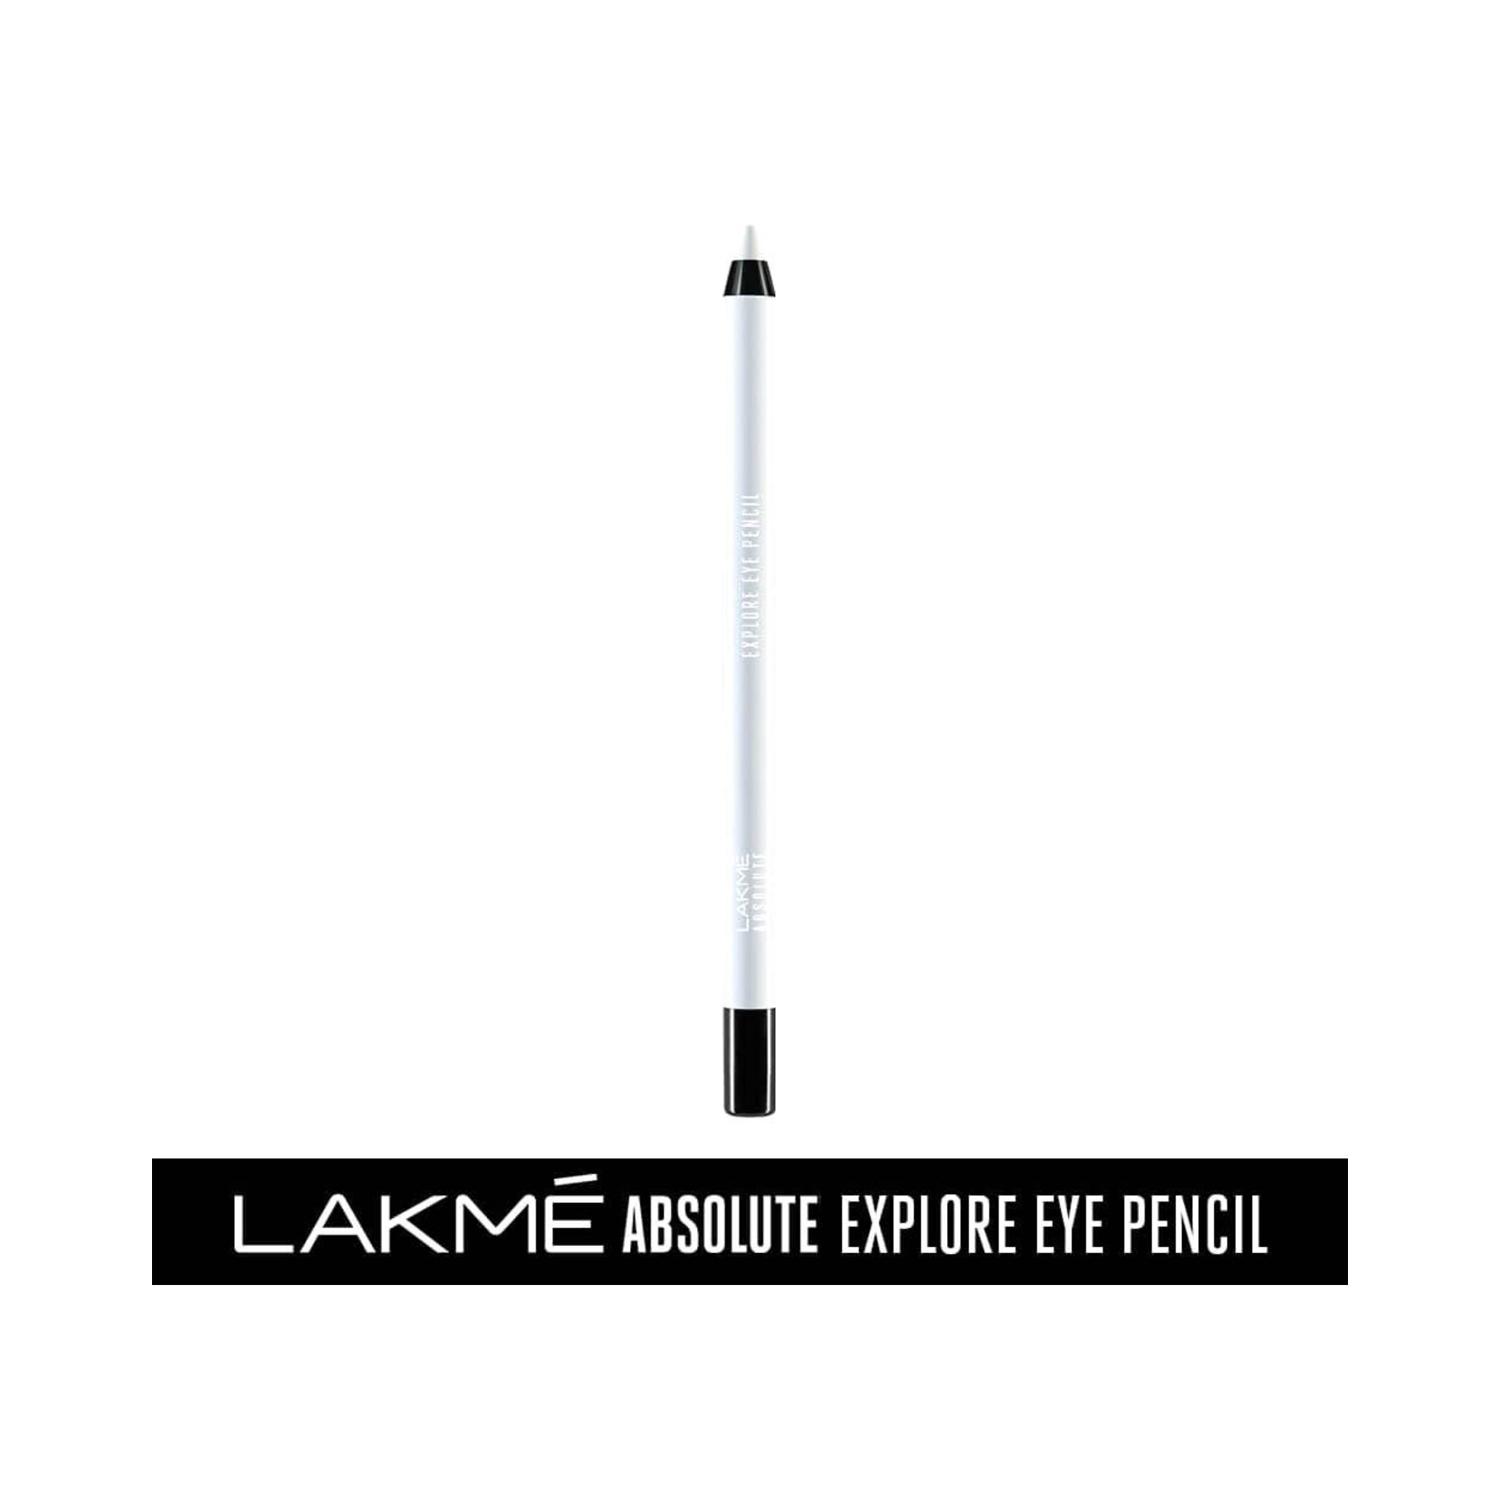 lakme absolute explore eye pencil - ethereal white (1.2g)